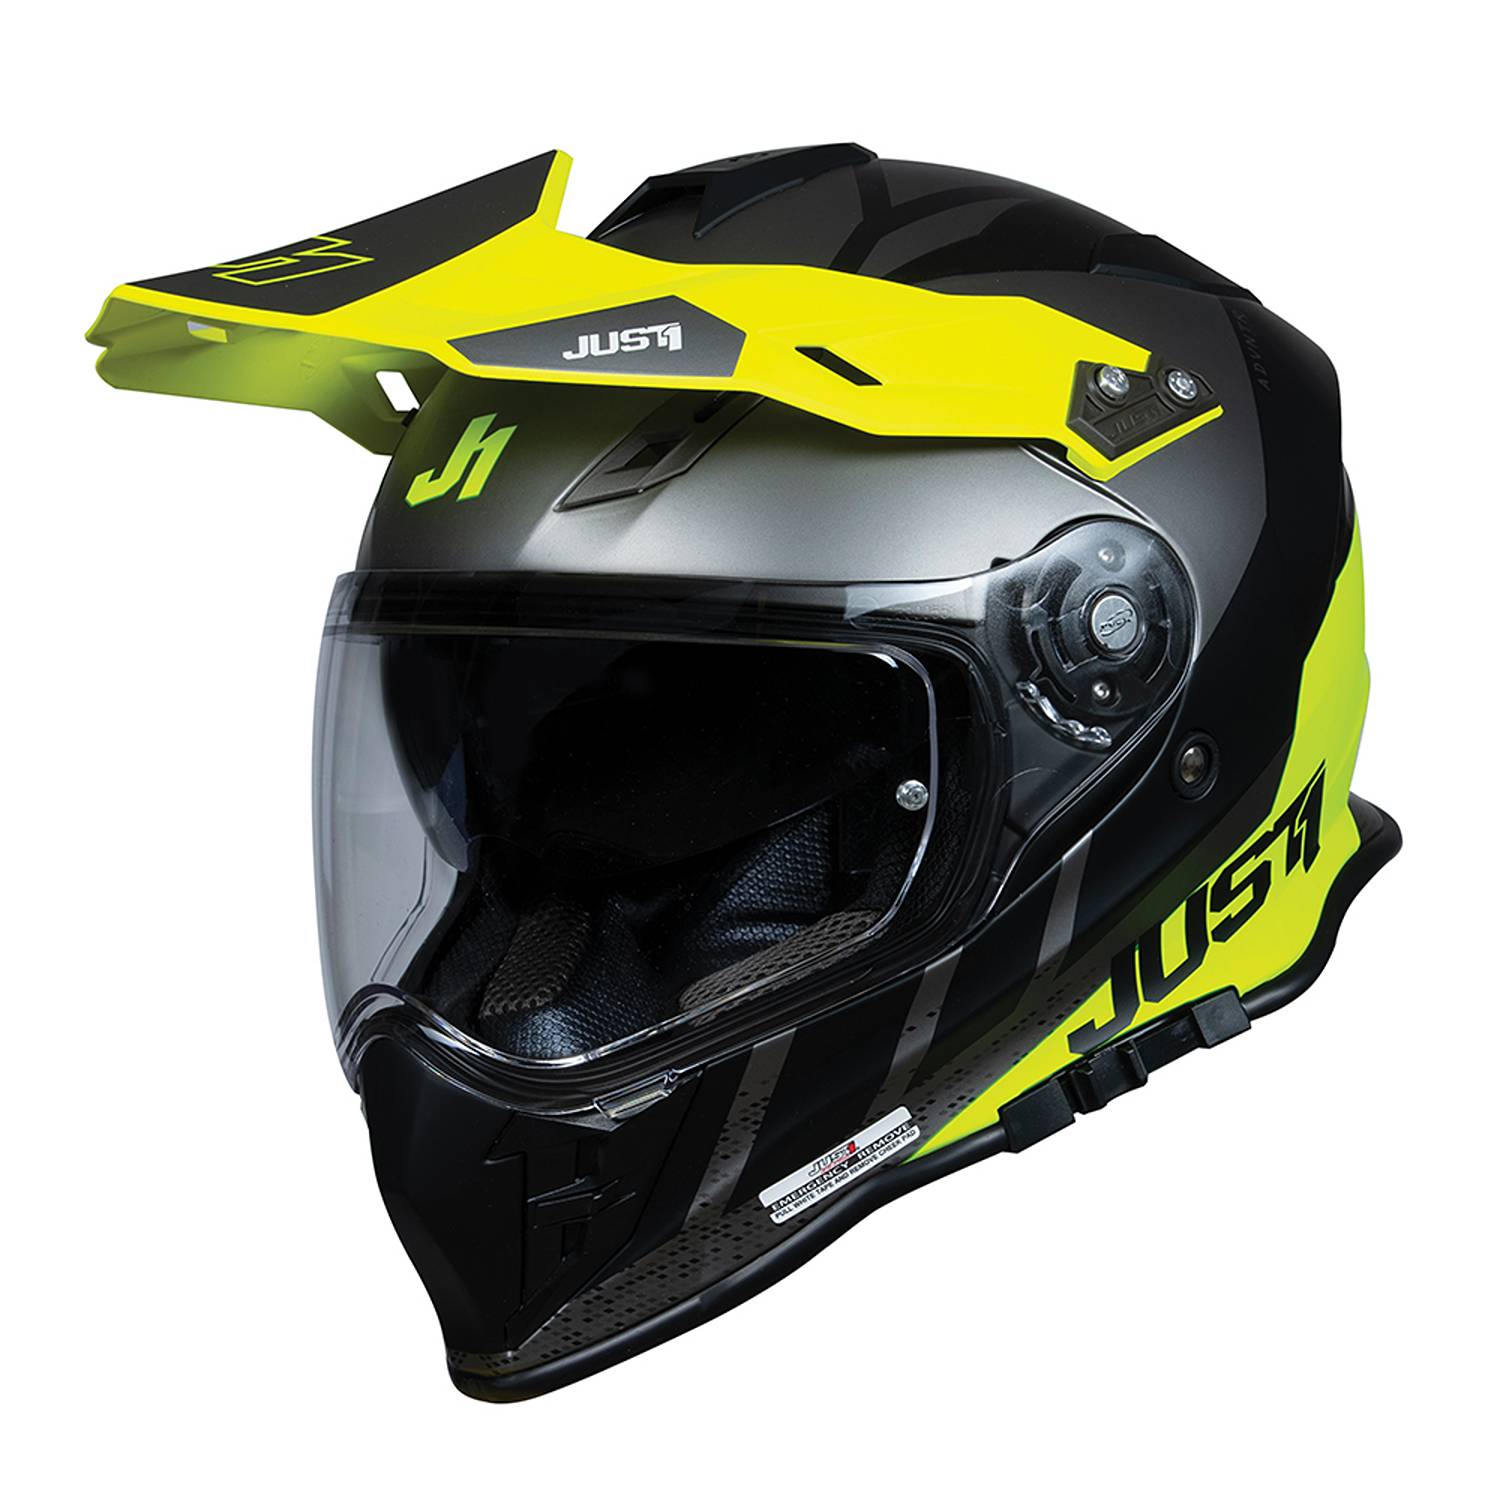 Image of Just1 J34 Pro Outerspace Jaune Vert Titane Aventure Casques Taille S